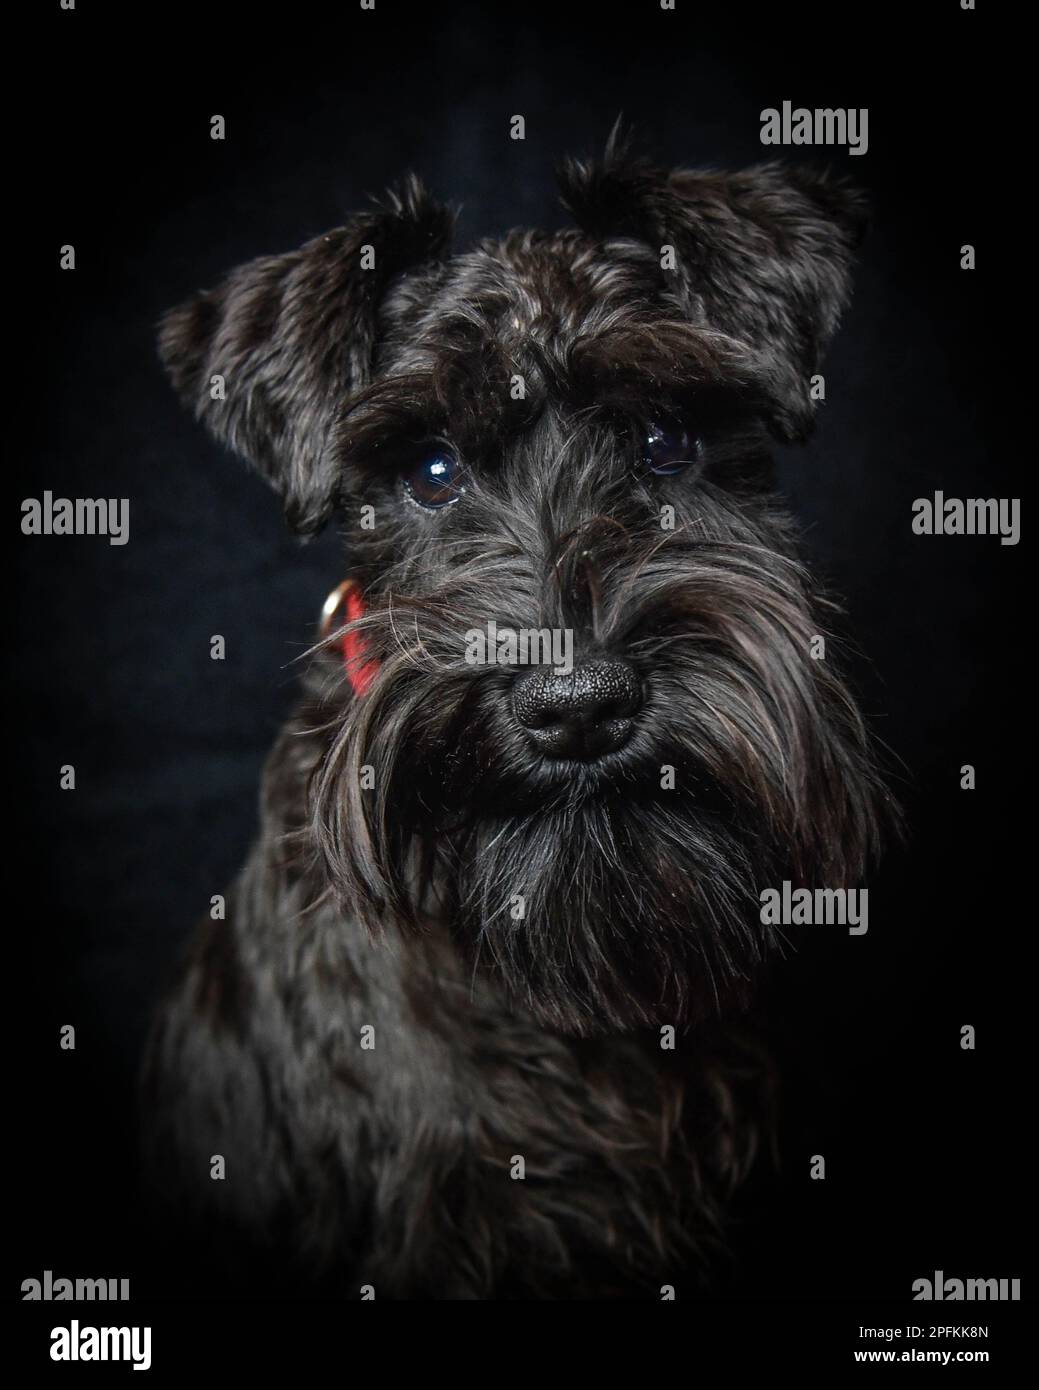 Head portrait of six month old miniature schnauzer dog in a red collar with a black background Stock Photo